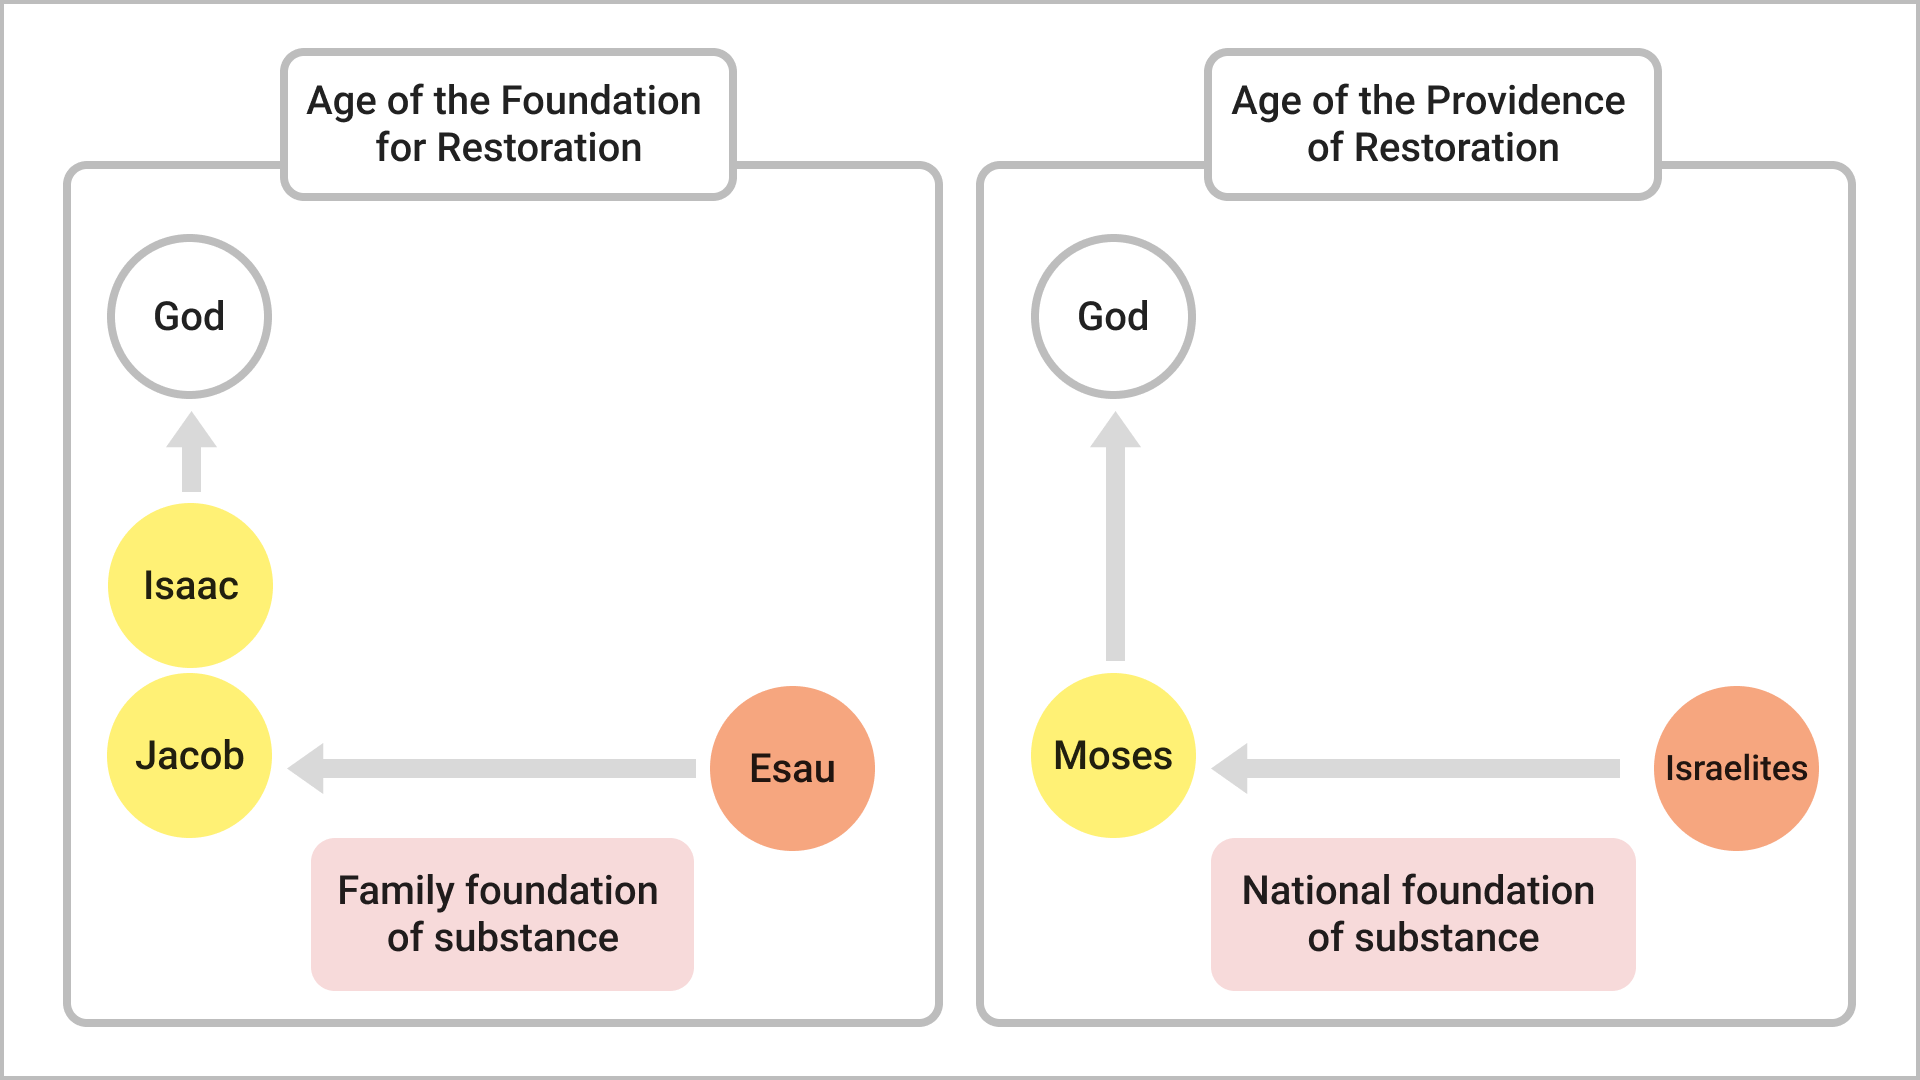 The Foundation of Substance